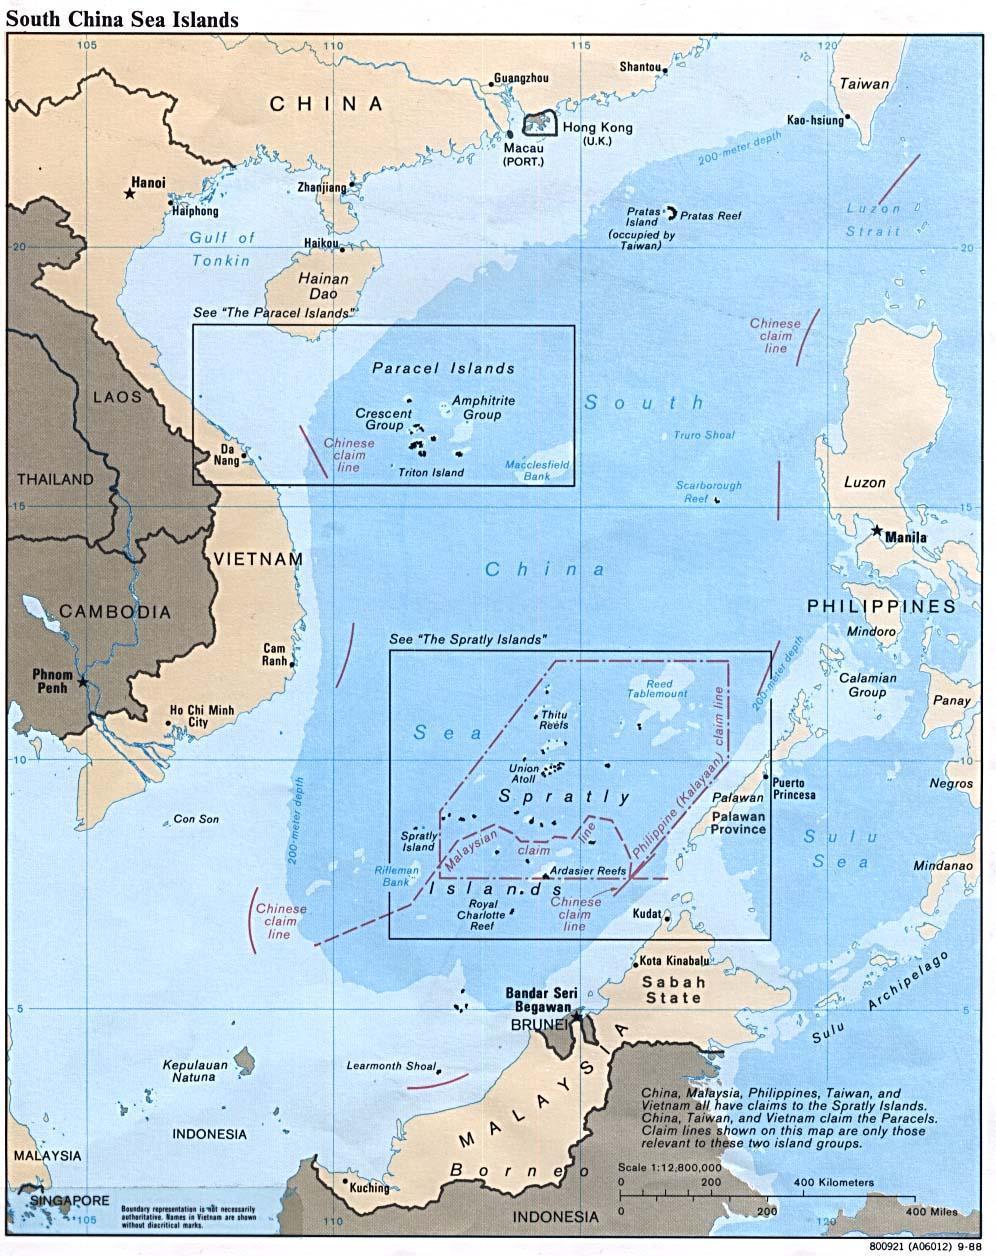 Vietnam's Interests in the outh China ea Territorial overeignty over Paracel and pratly Geostrategic Interests (Protect national security from a sea-based attack, sea lanes of communication)